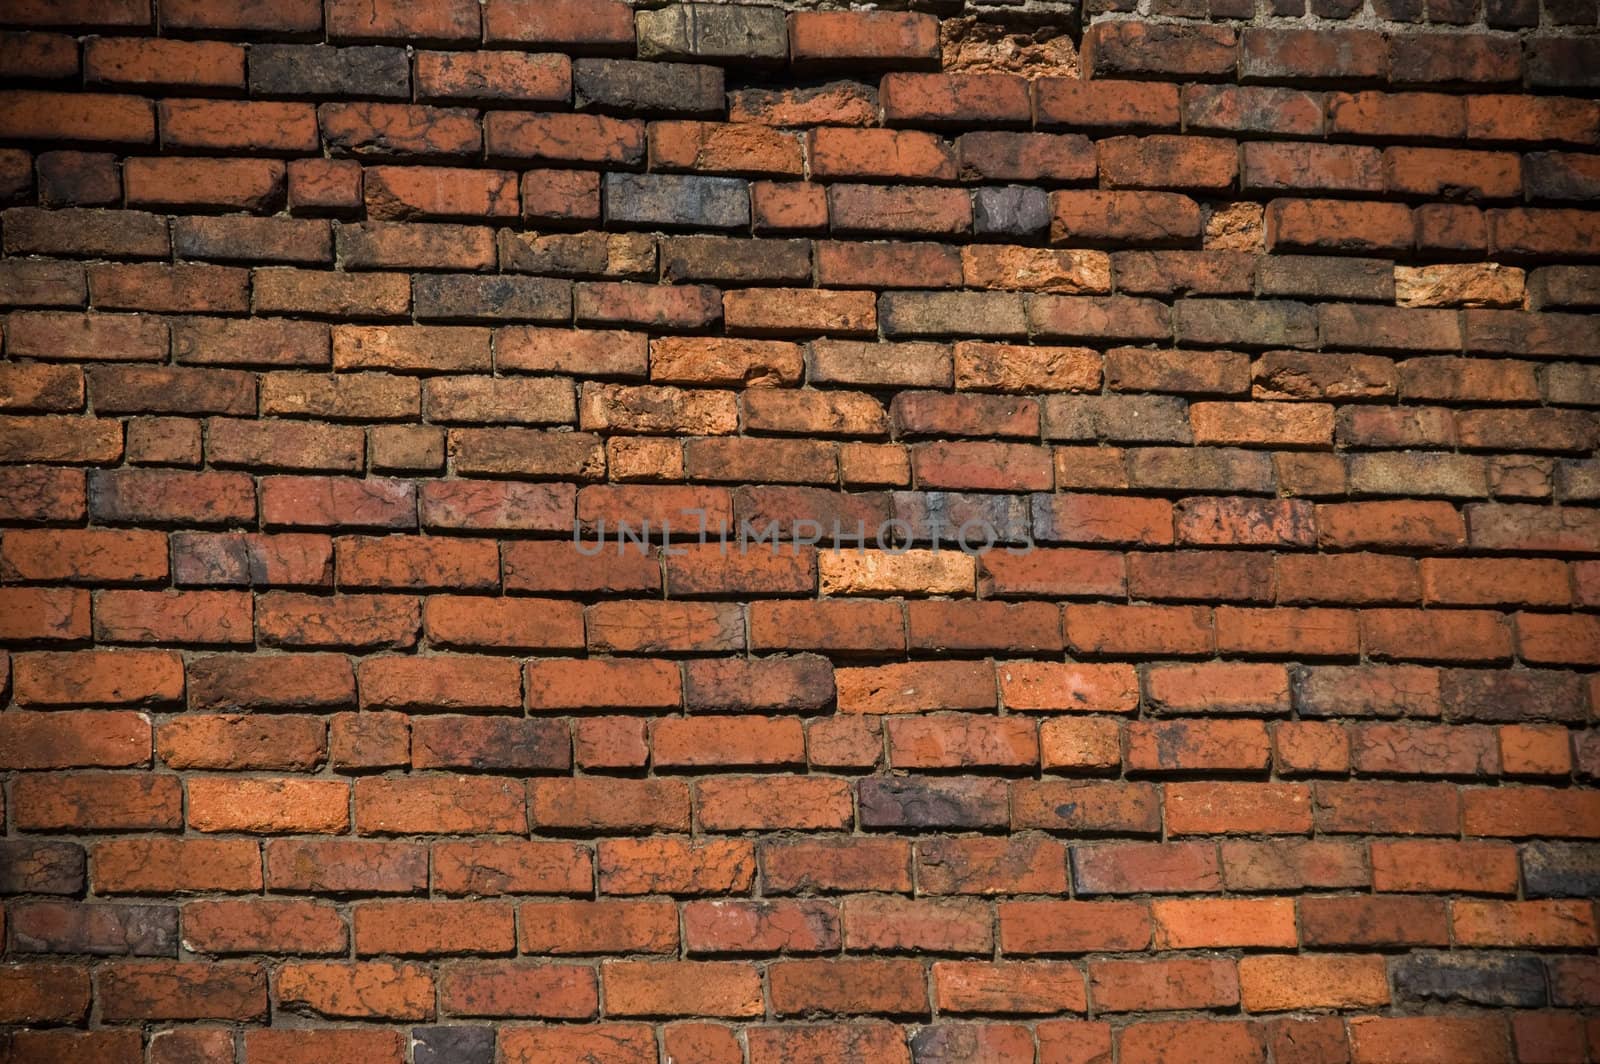 A Colourful Brick Wall old Tactile Photograph